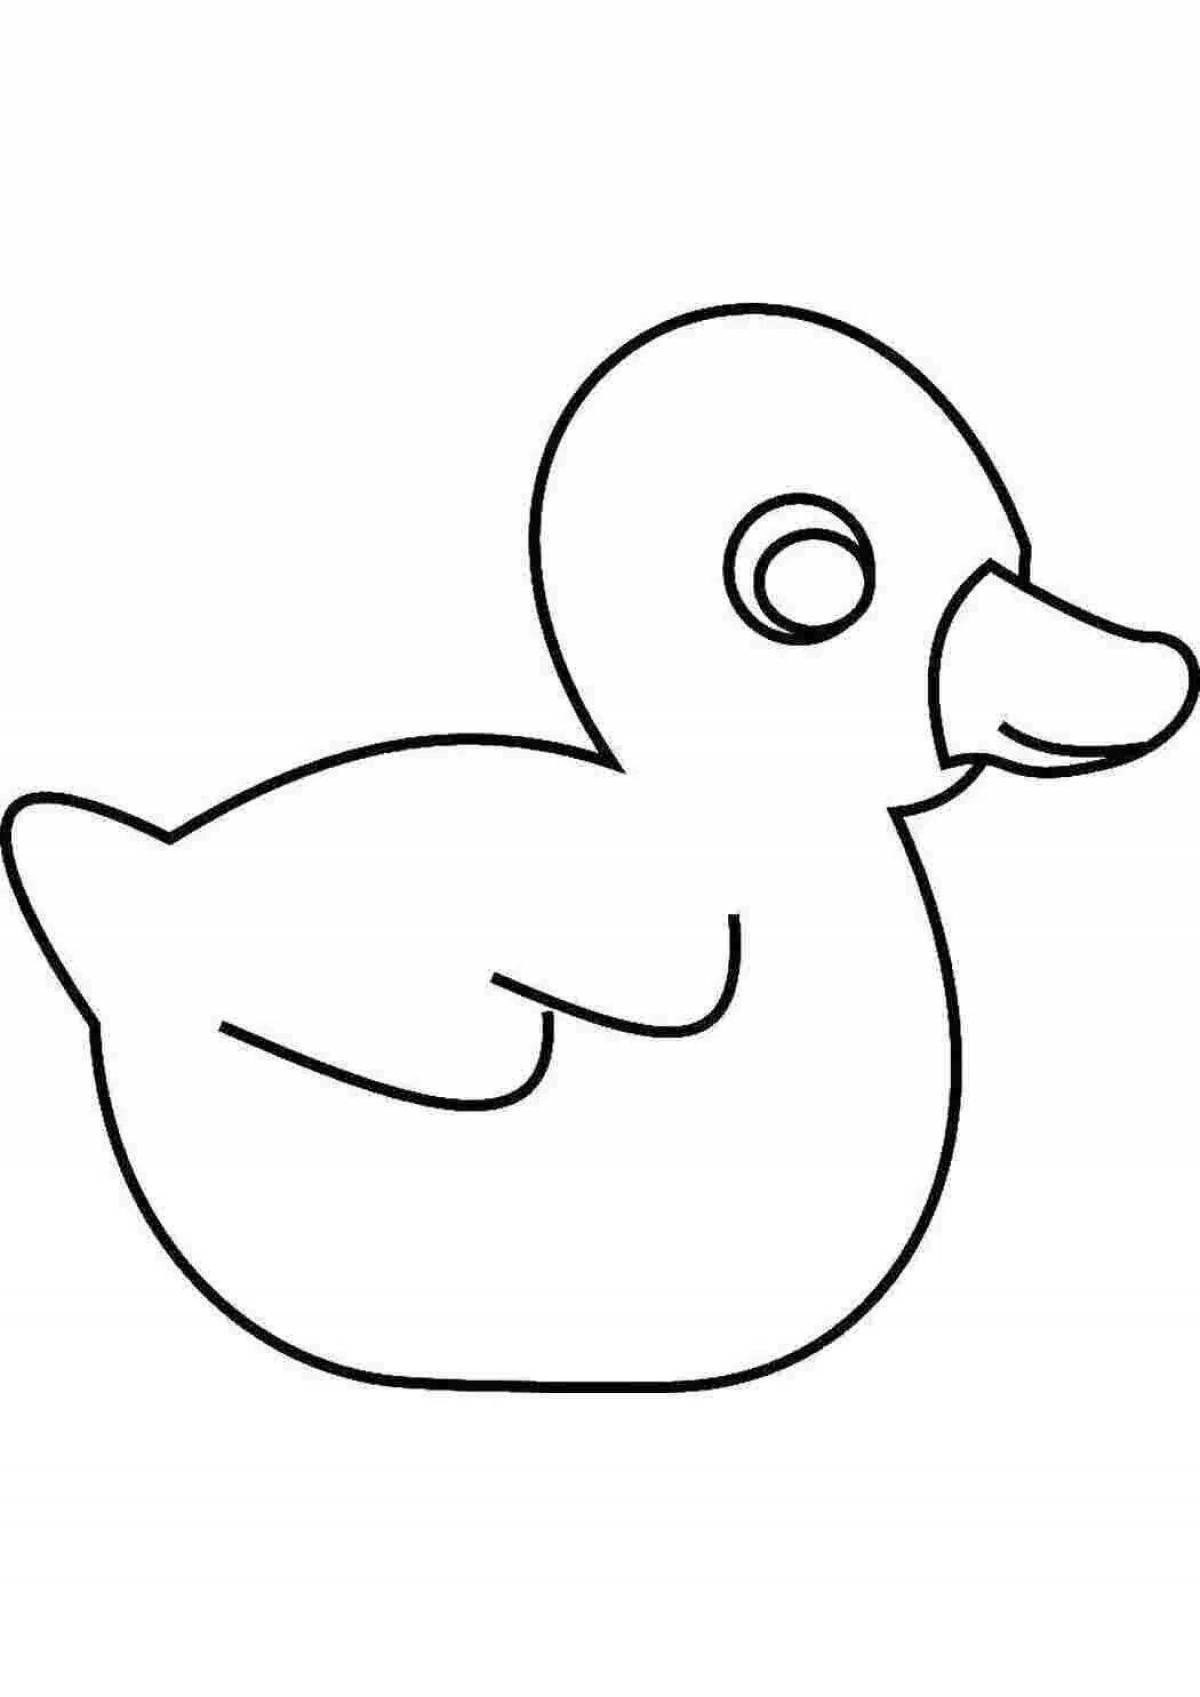 Cute duck coloring page